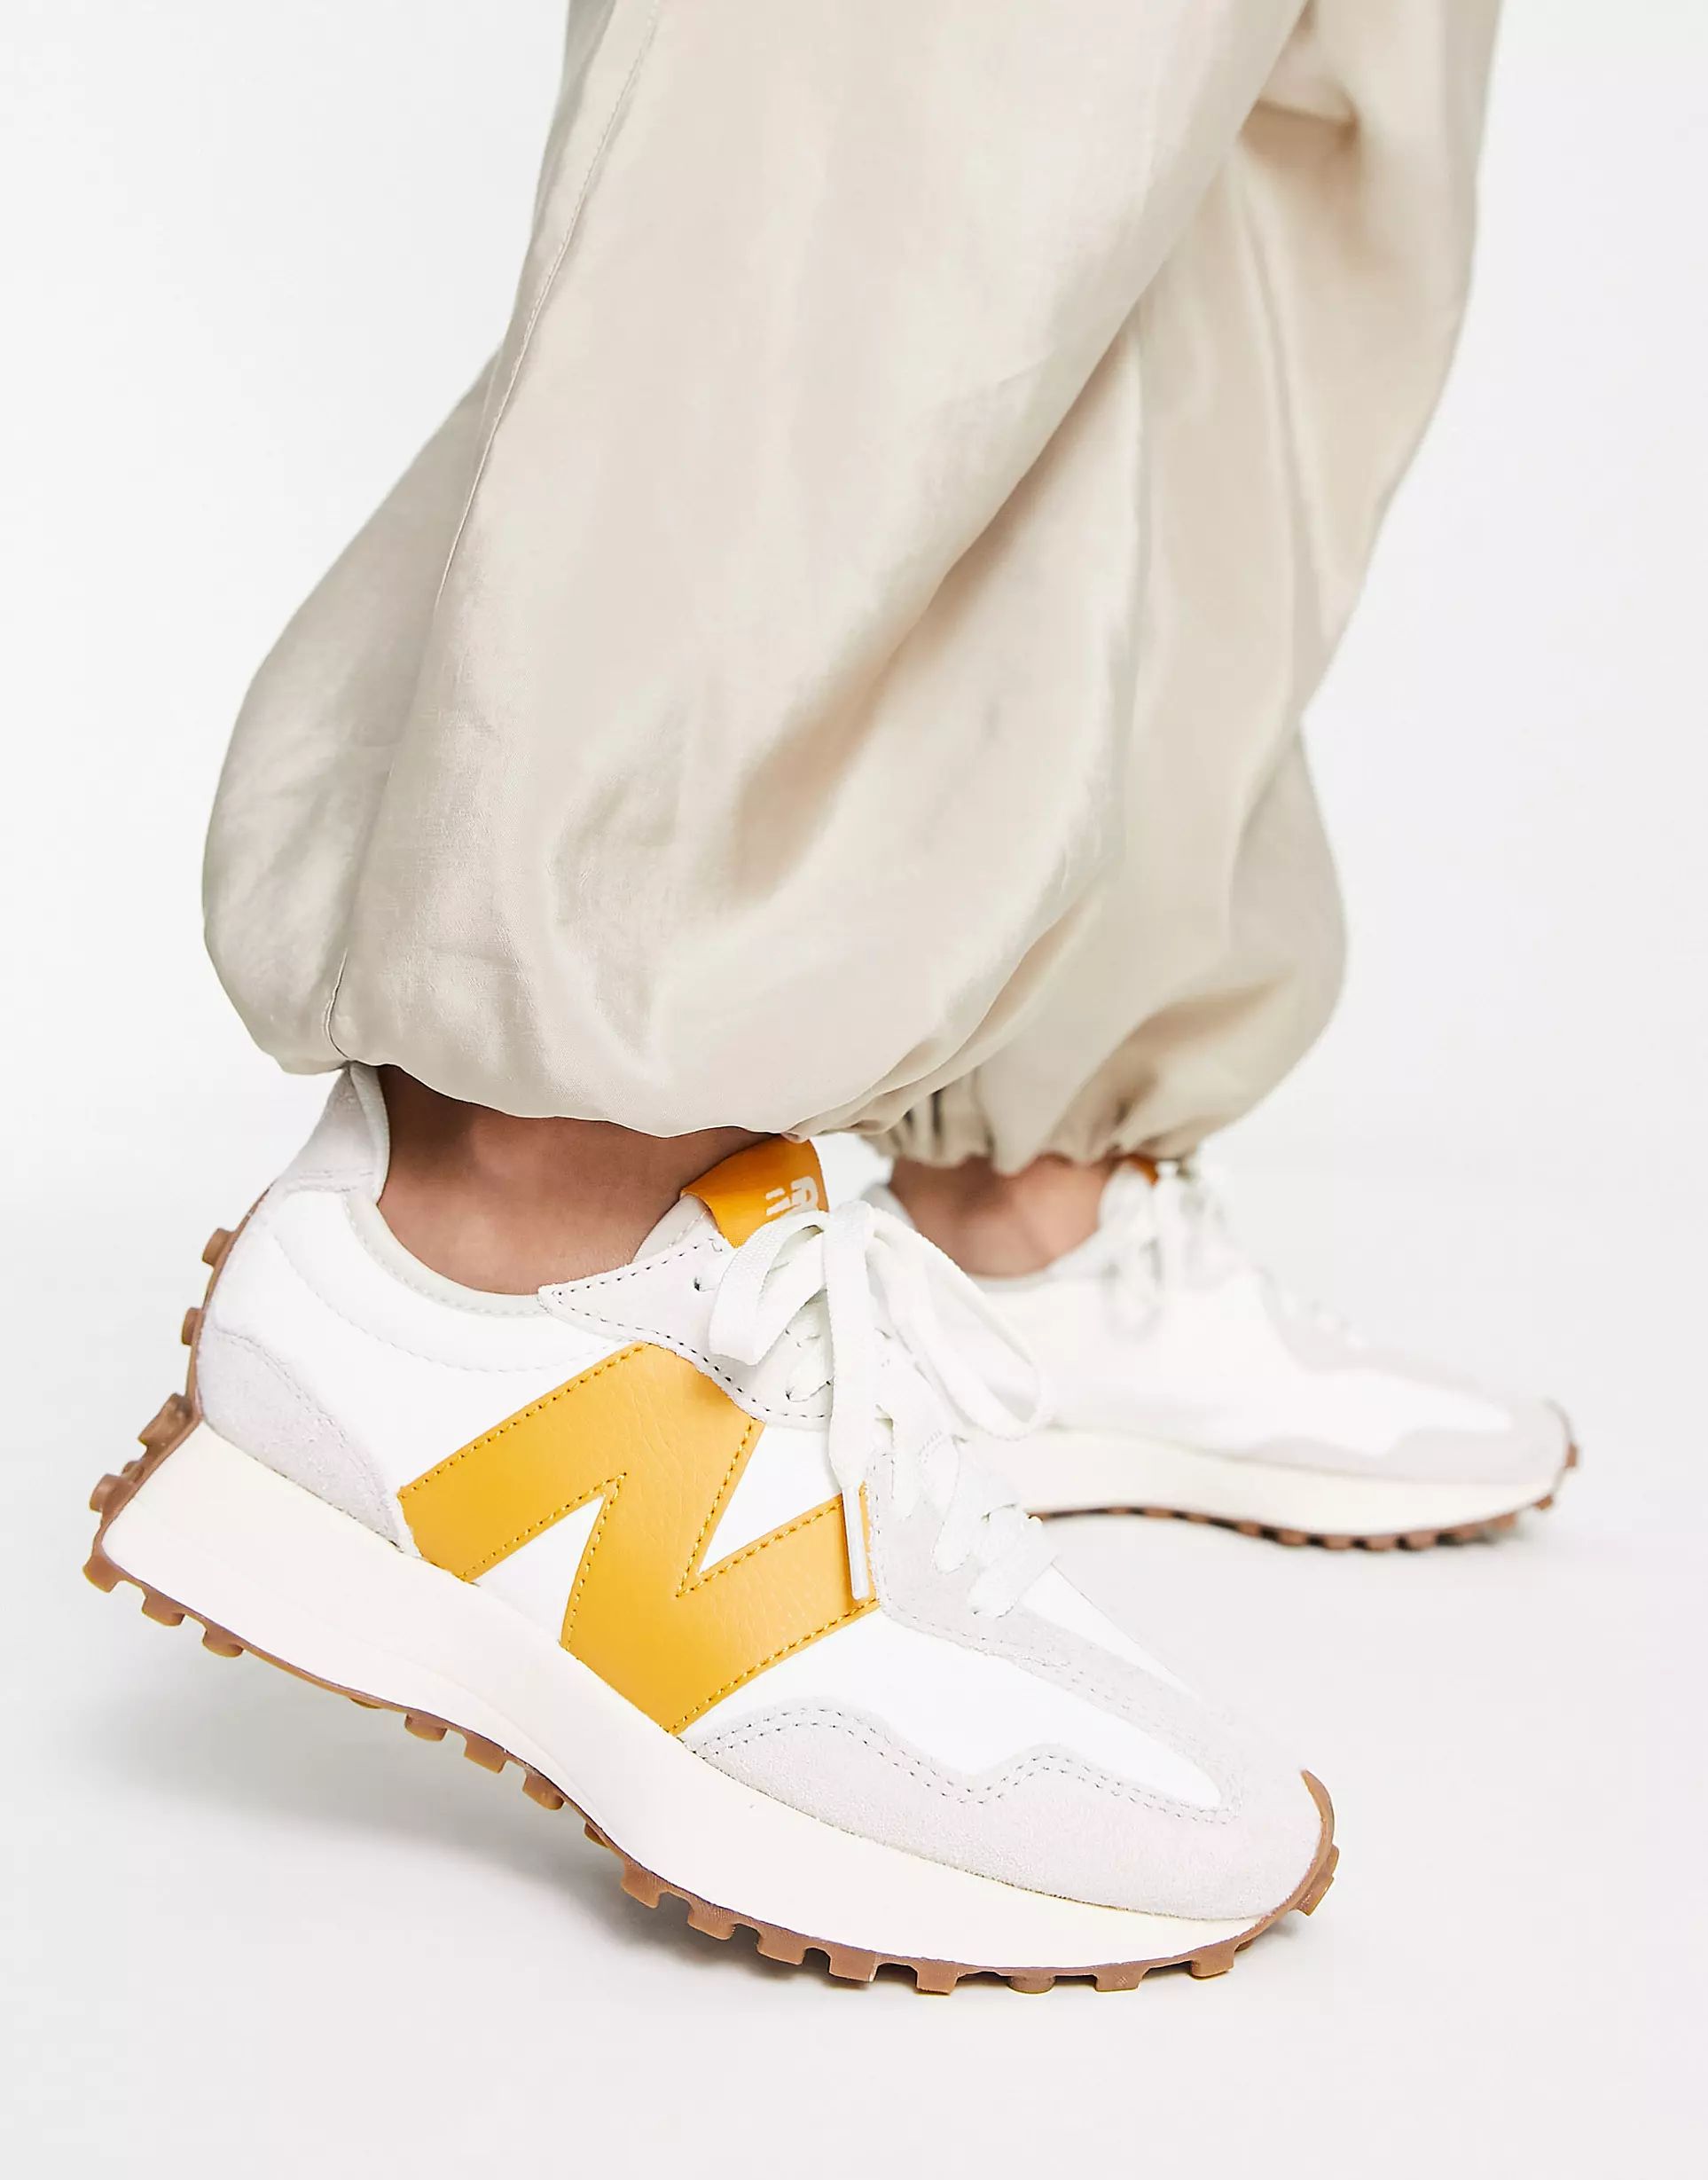 New Balance 327 sneakers in off white with yellow detail - Exclusive to ASOS | ASOS (Global)